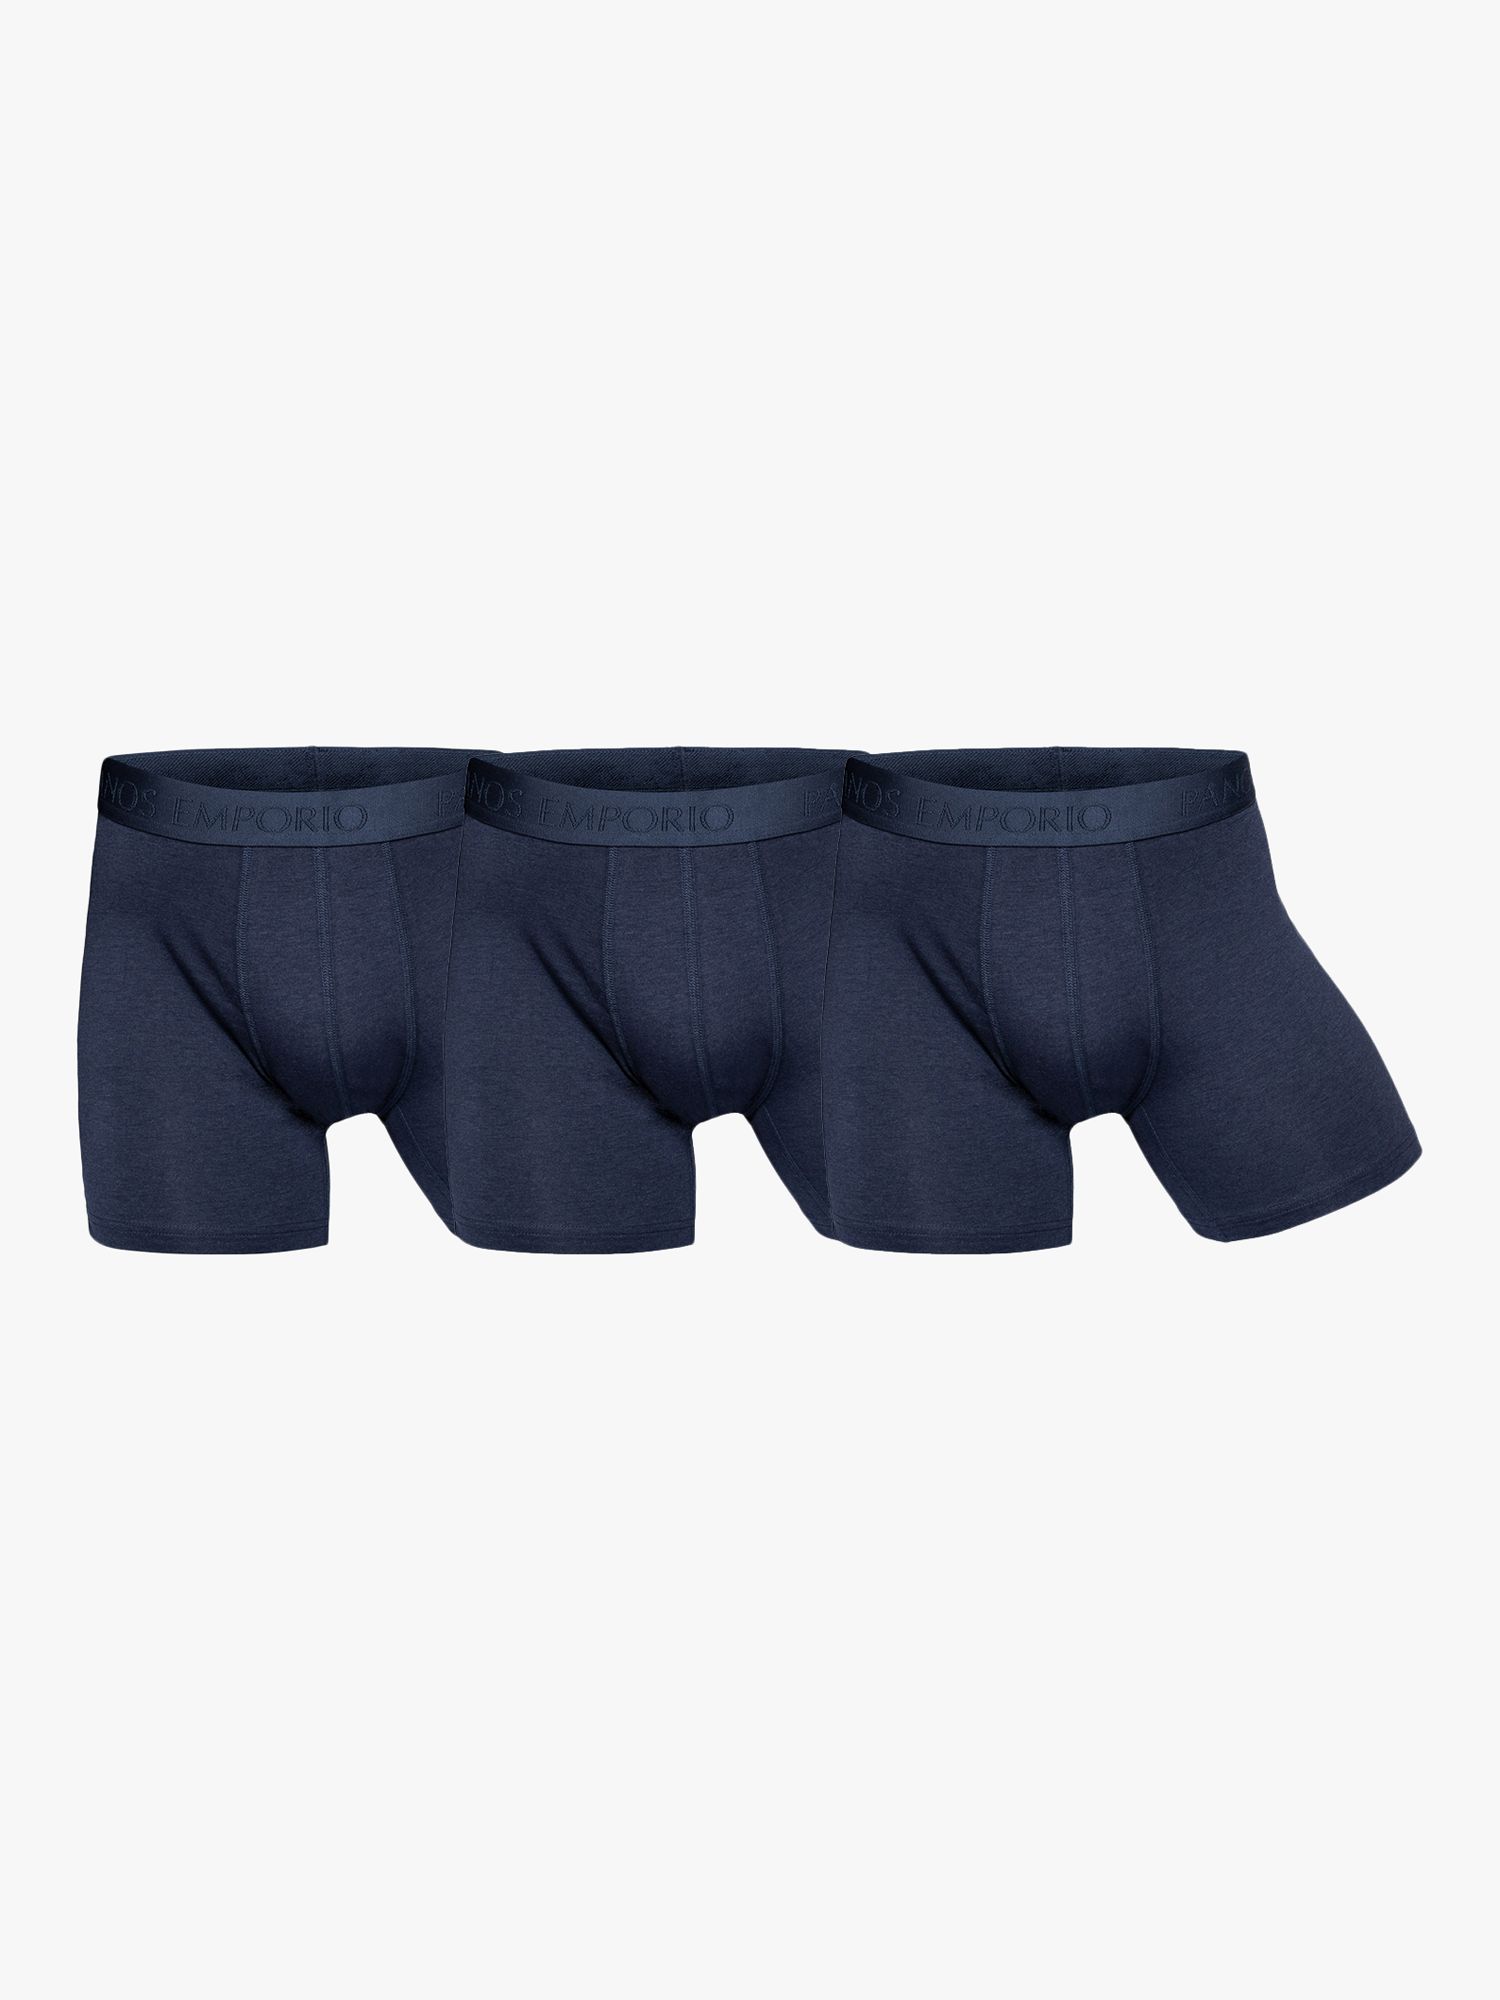 Panos Emporio Eco Bamboo and Organic Cotton Blend Trunks, Pack of 3 ...